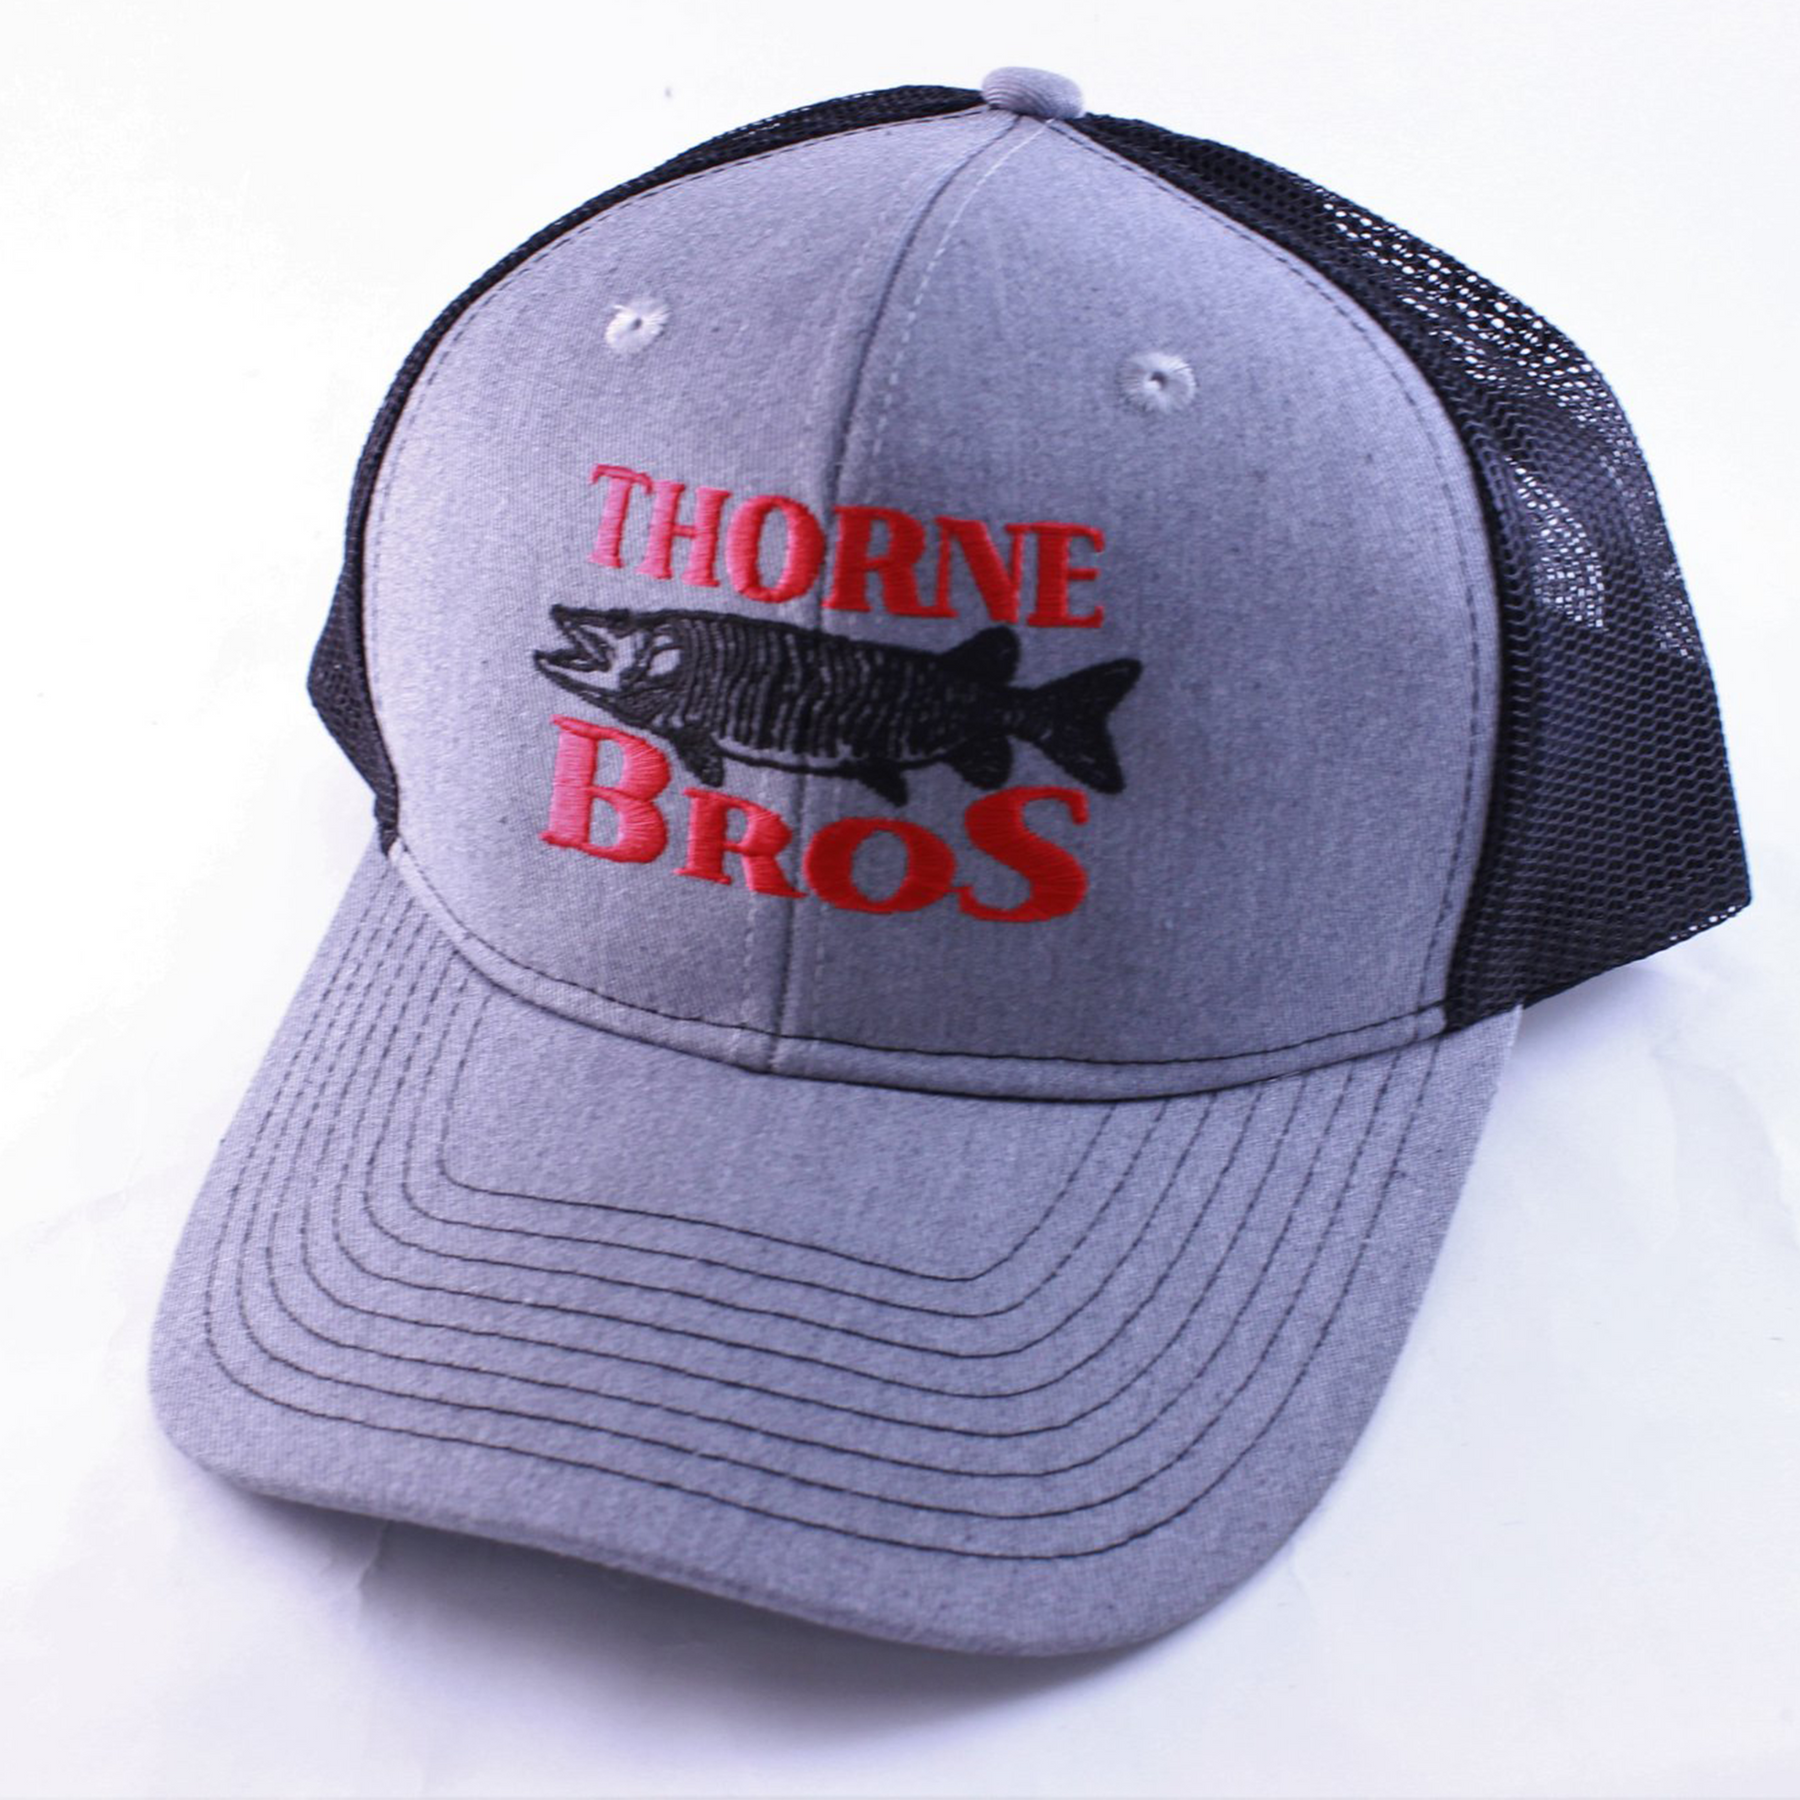 Thorne Bros Hat - FREE w/$150+ Purchase (Limit one per order) (8093657025)